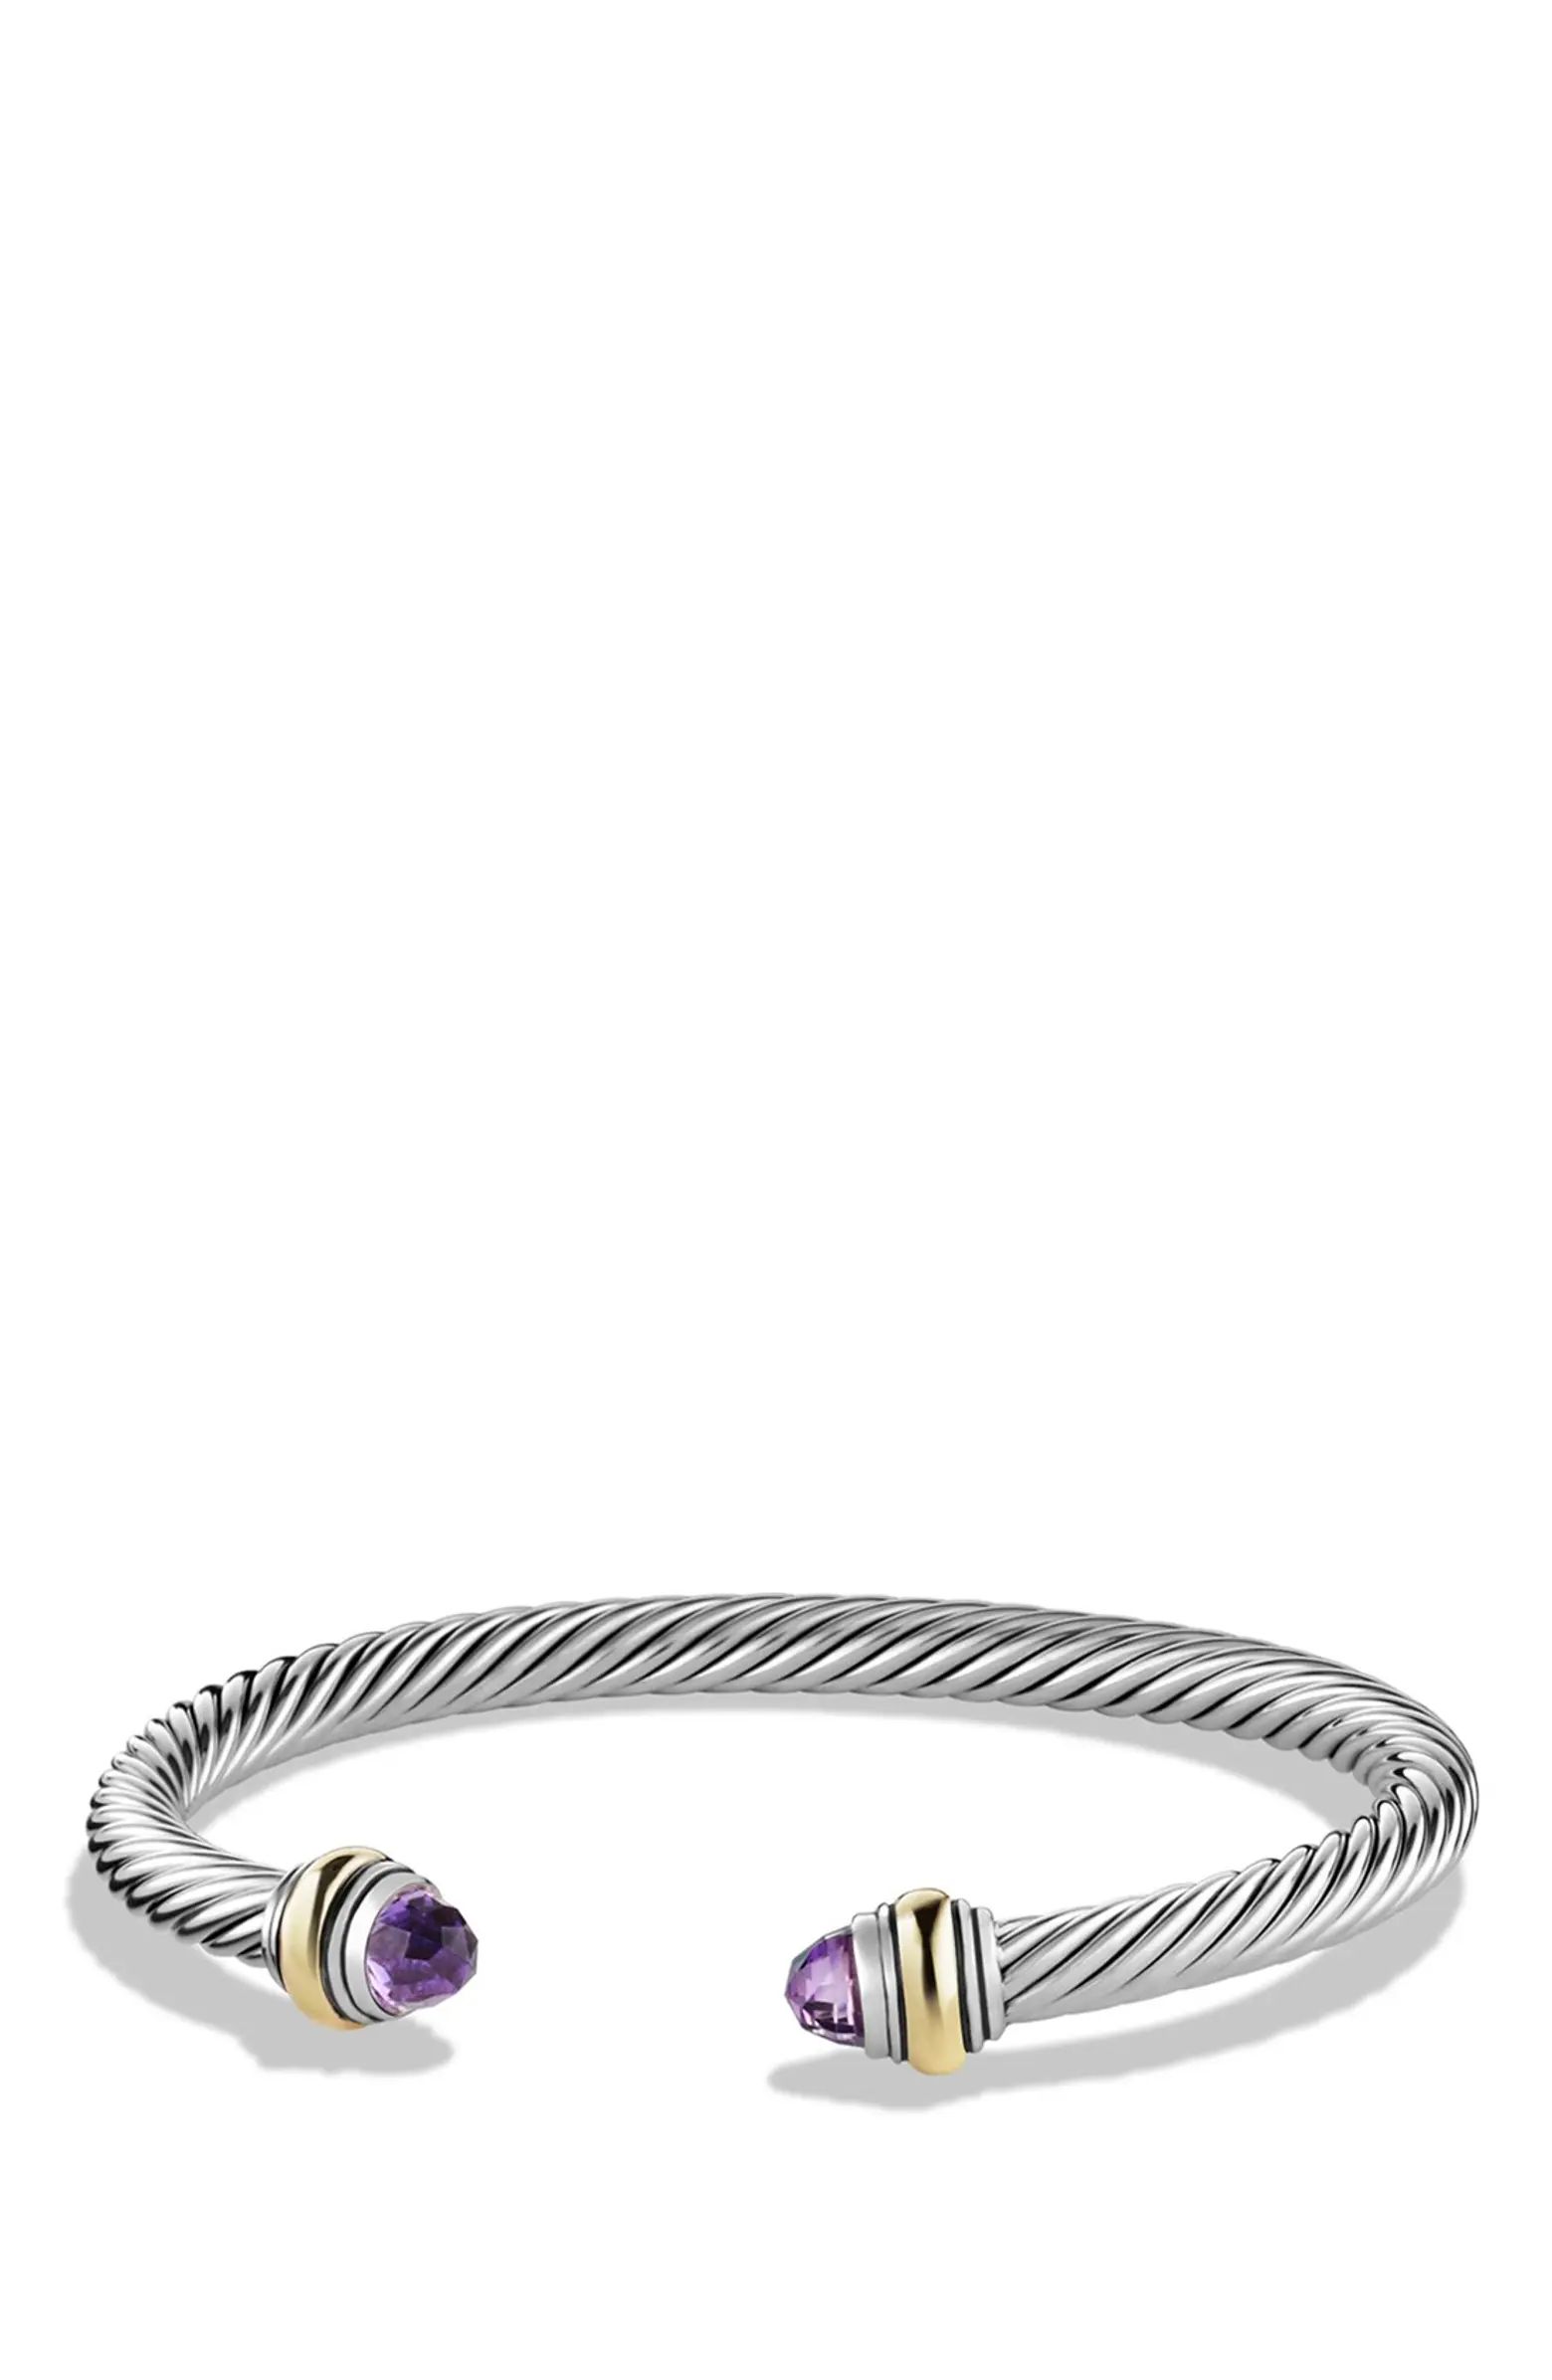 David Yurman Cable Classics Bracelet with Semiprecious Stones & 14K Gold Accent, 5mm | Nordstrom | Nordstrom